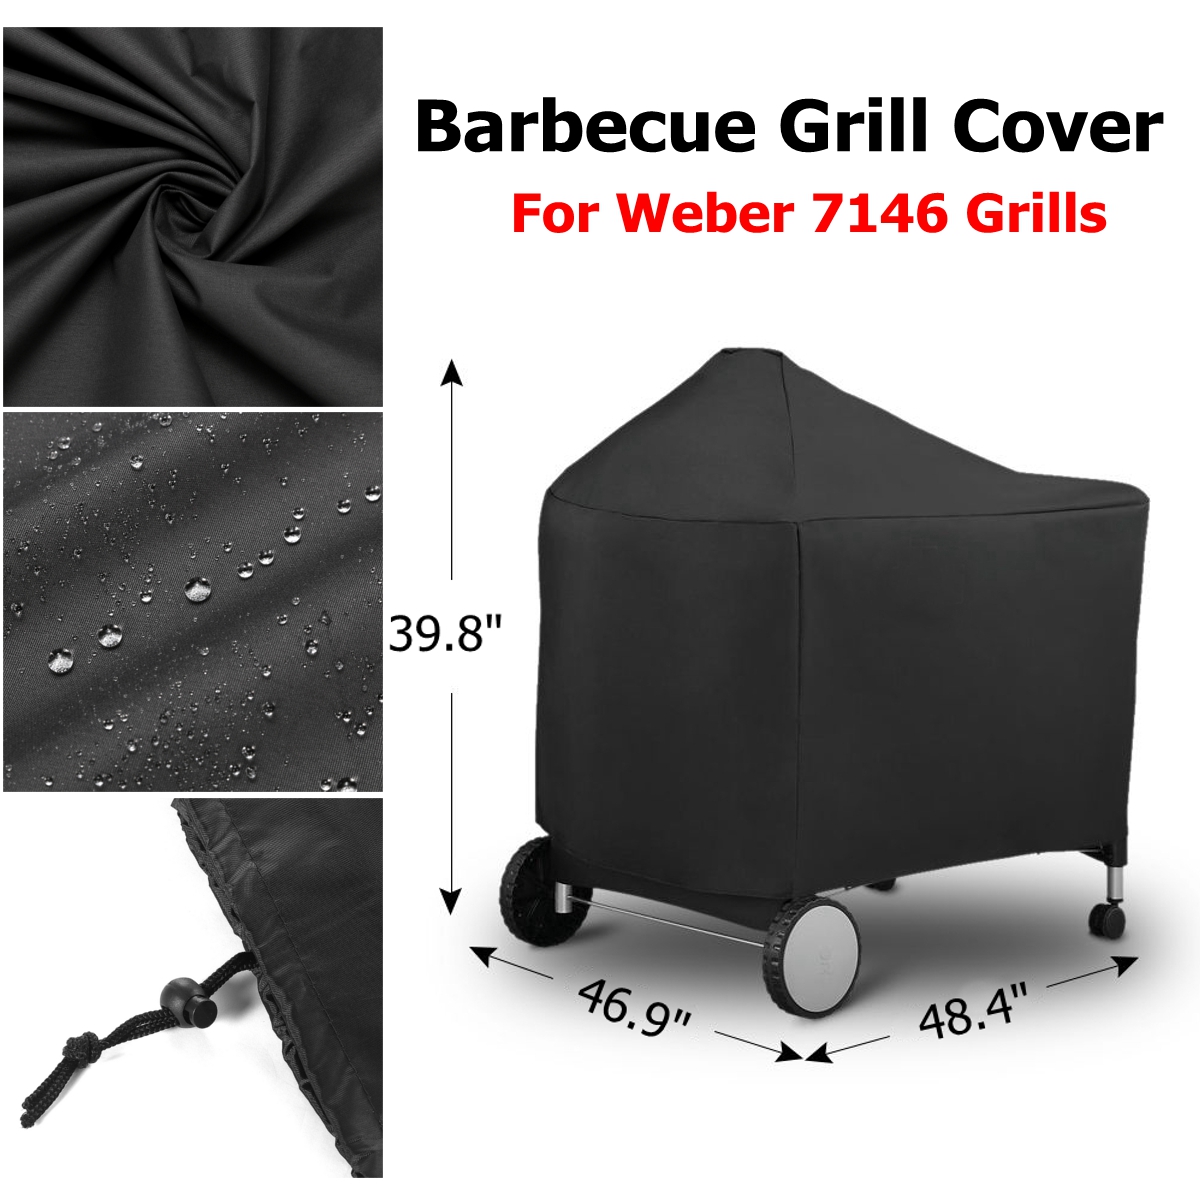 Waterproof-Barbecue-Grill-Cover-for-Weber-7146-Performer-Premium-and-Deluxe-1576280-4